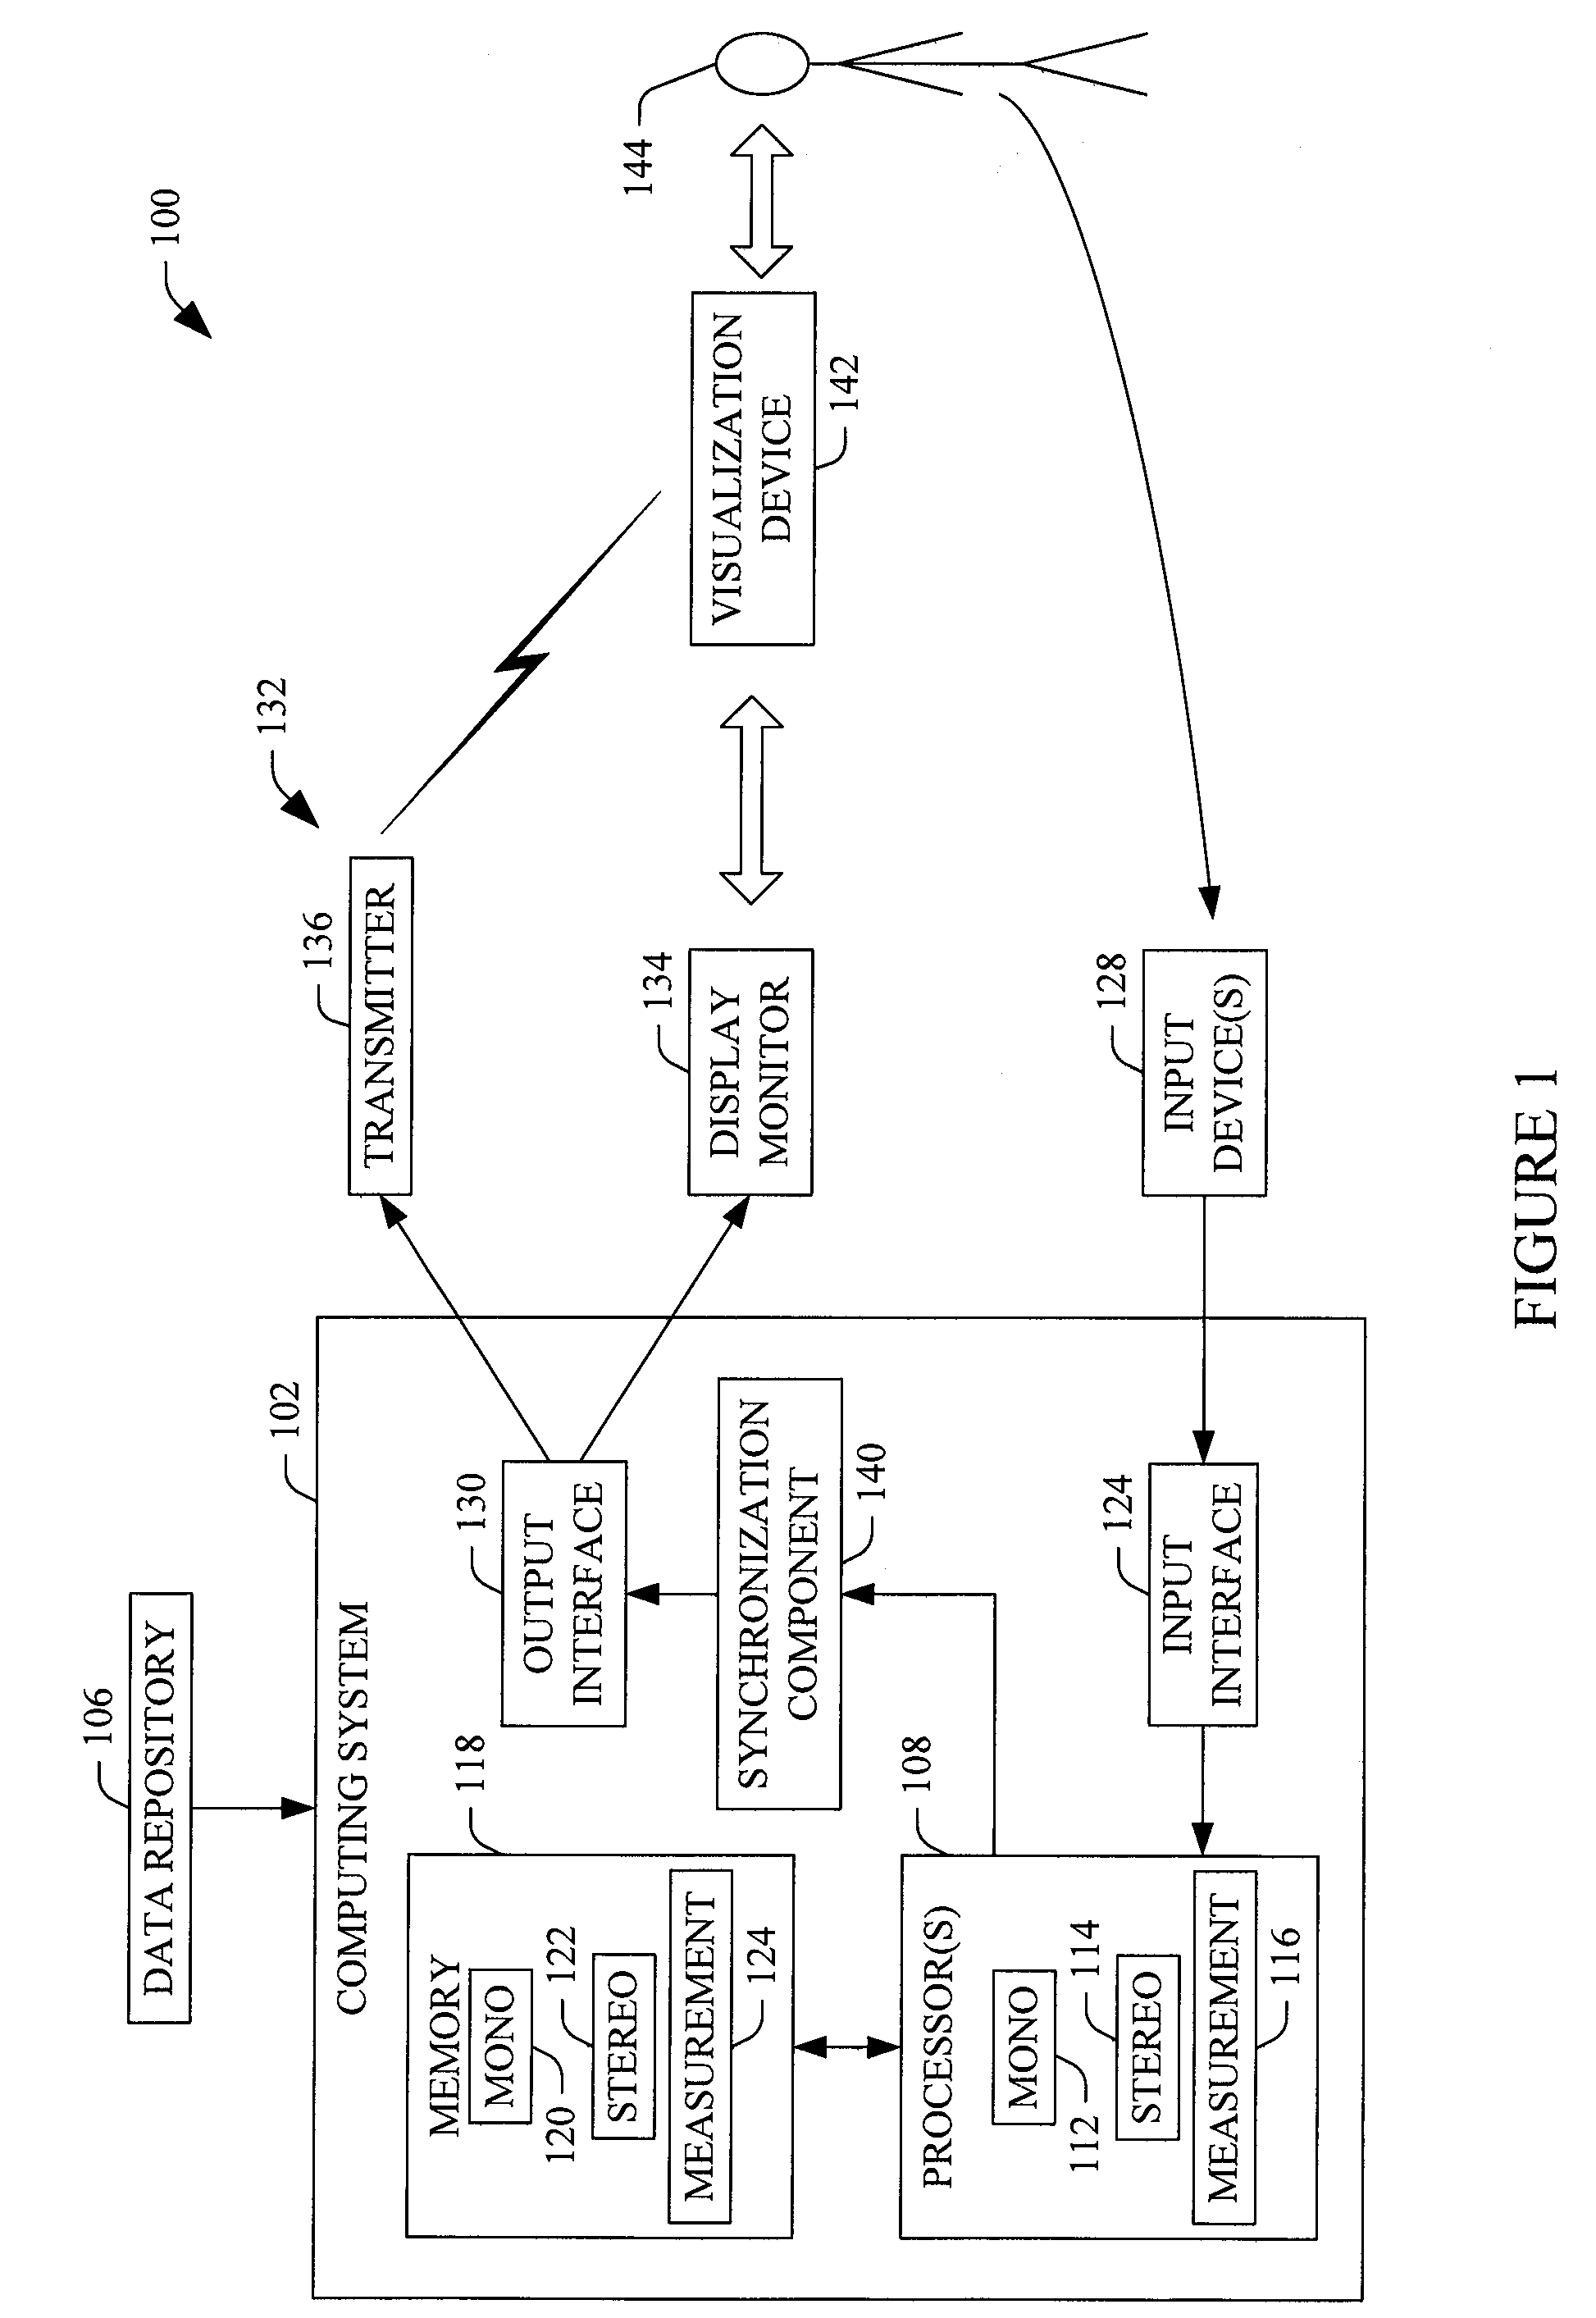 Three dimensional imaging data viewer and/or viewing